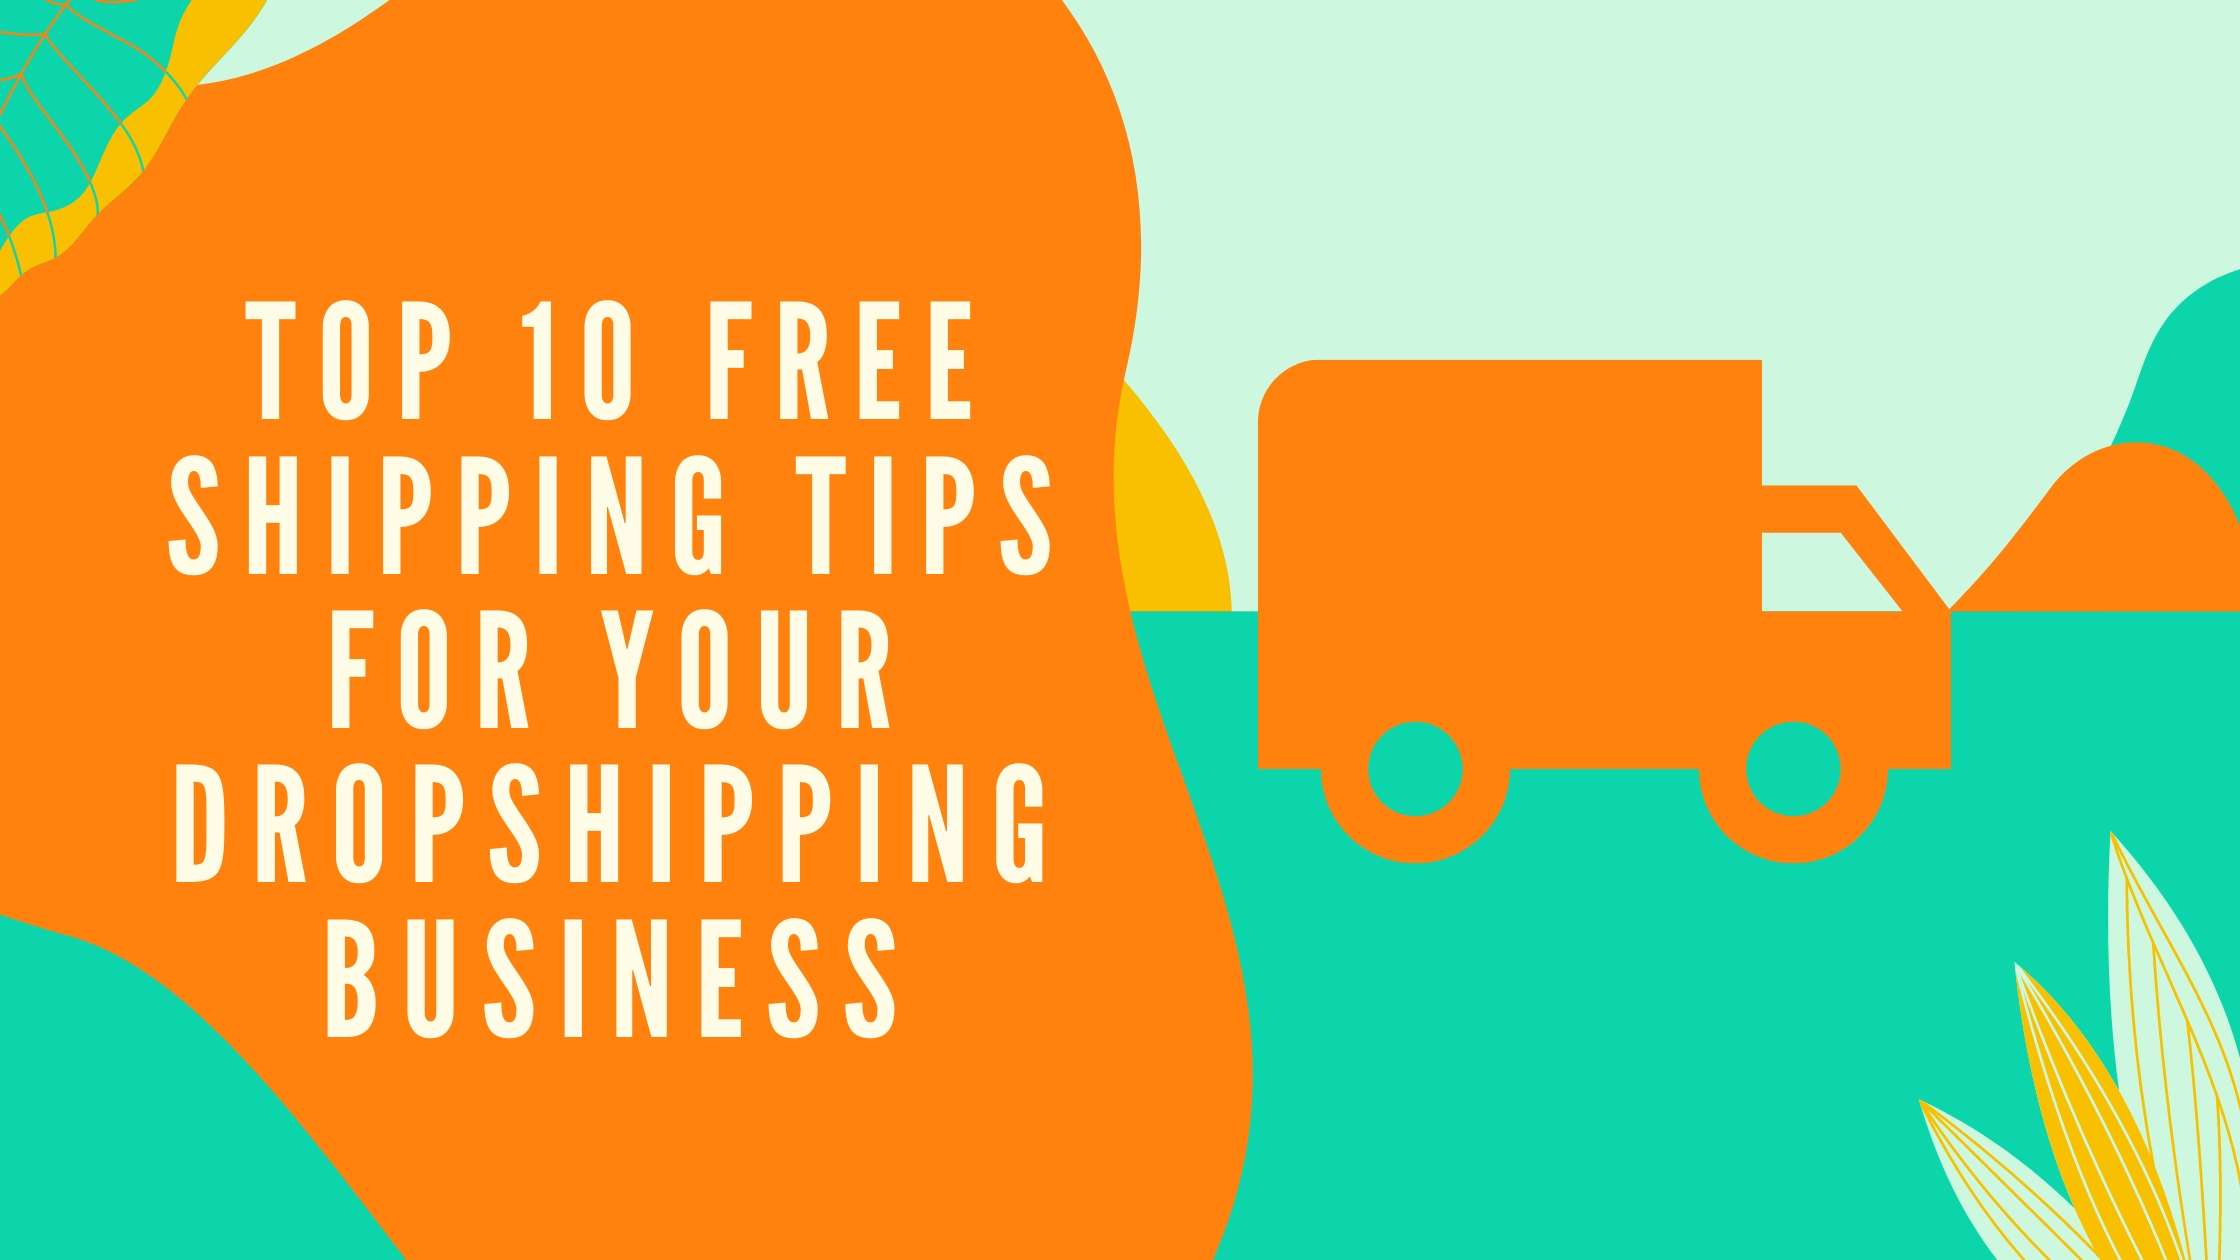 Top 10 Free Shipping Tips For Your Dropshipping Business